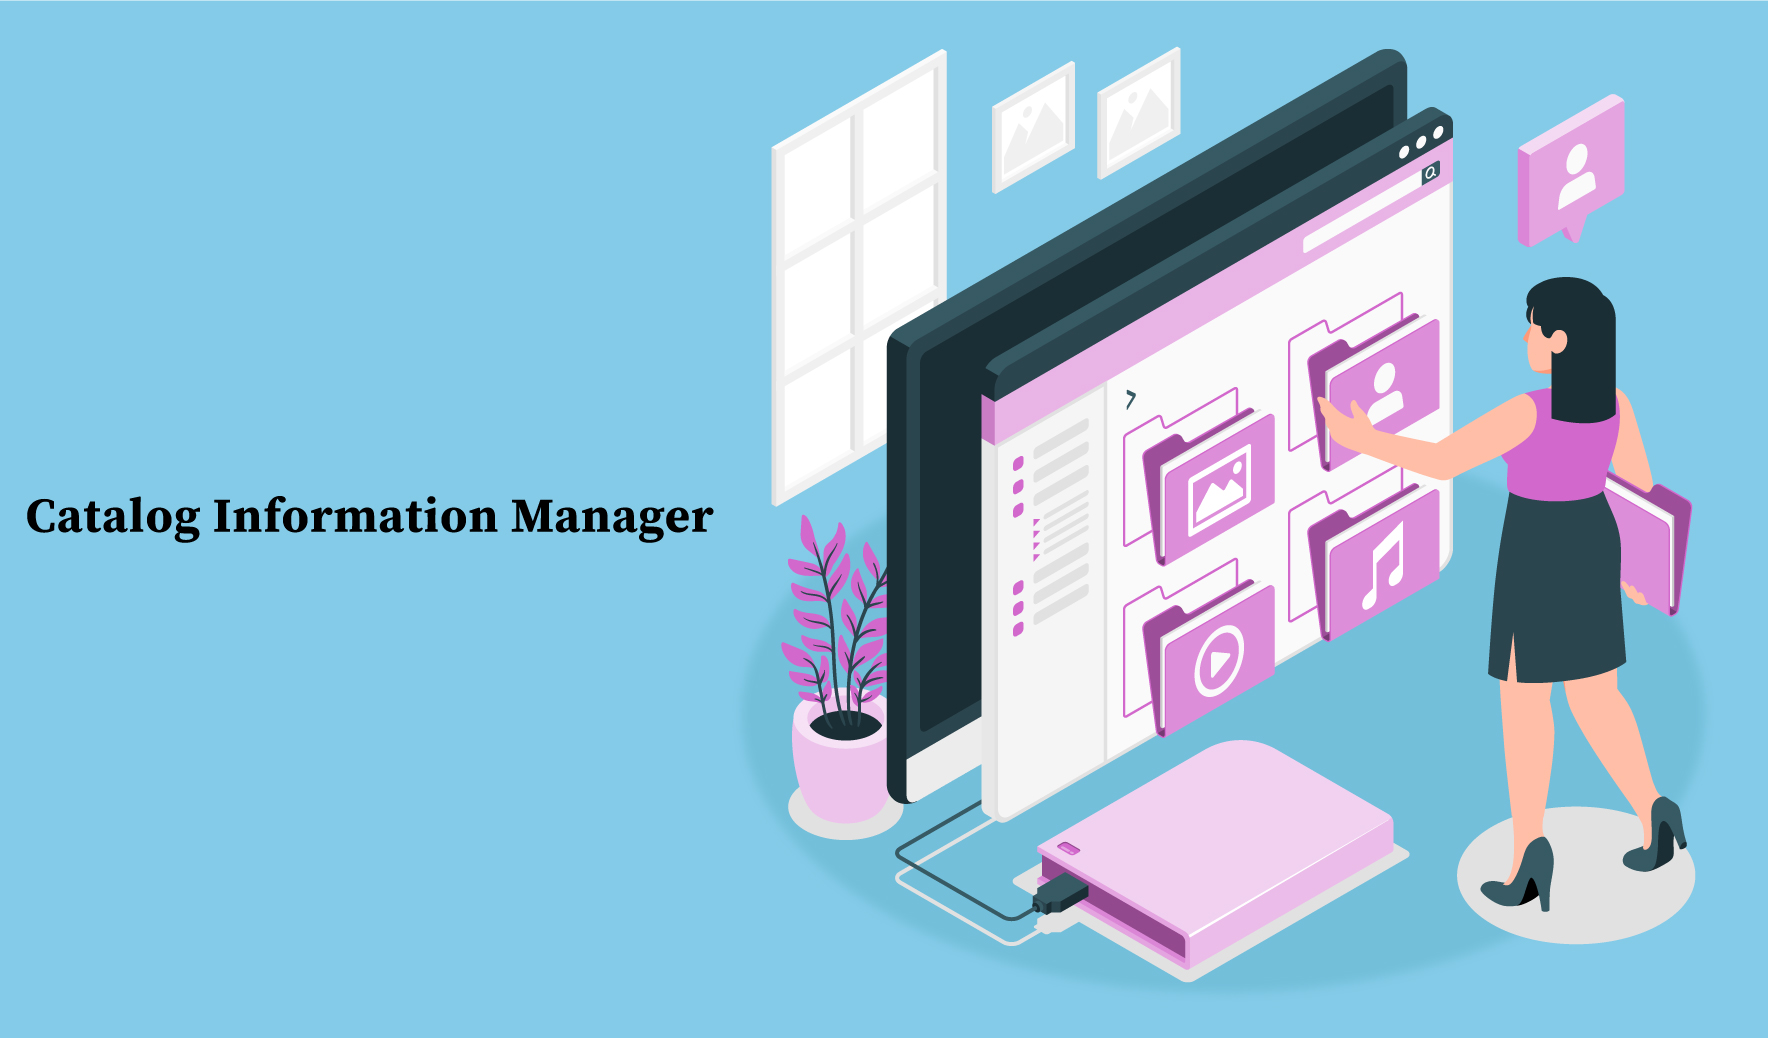 Top 10 benefits of catalog information manager